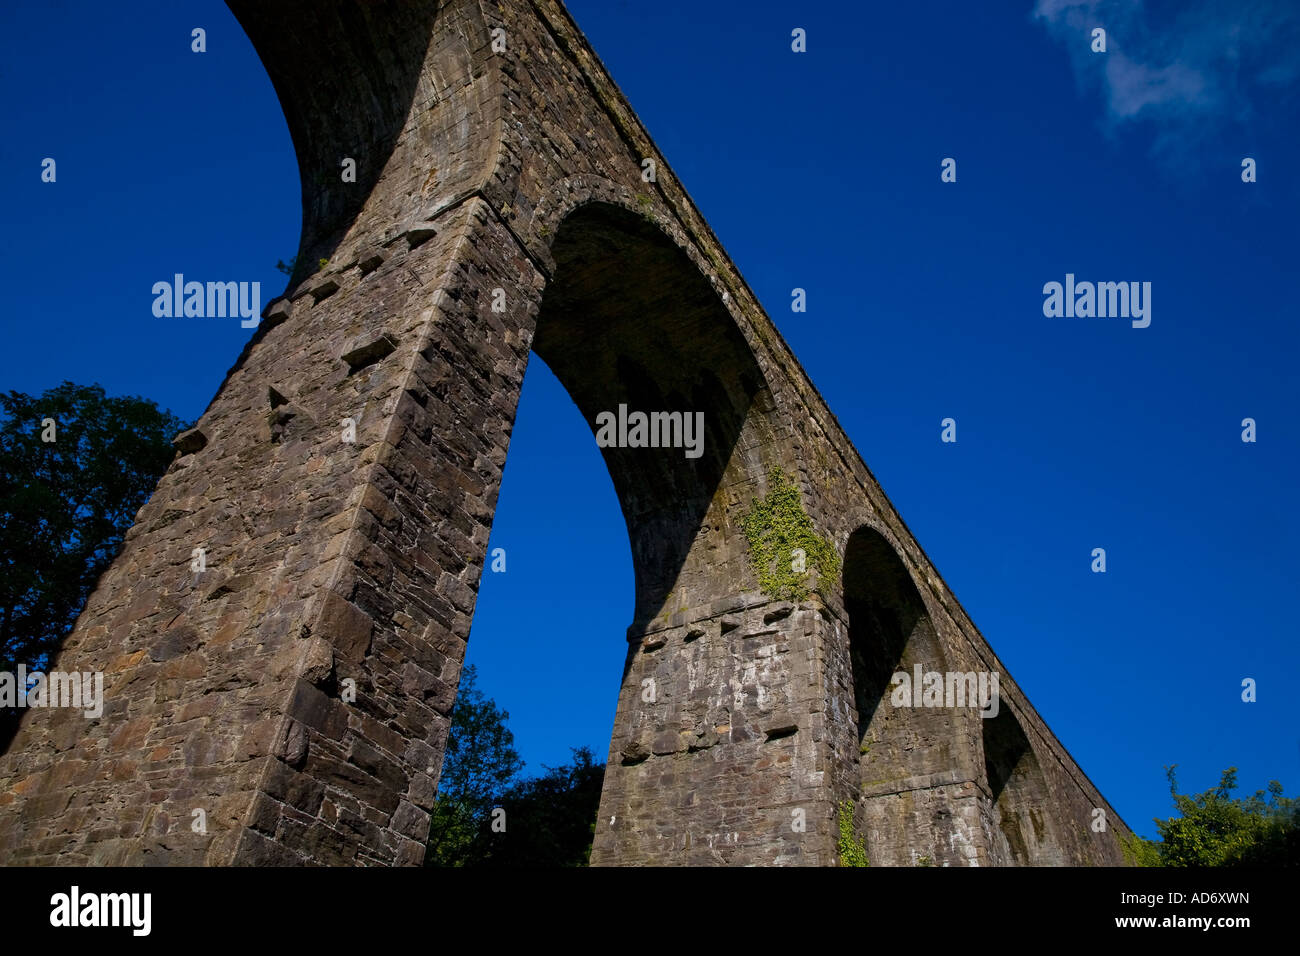 Railway Viaduct on the disused Waterford to Dungarvan Line, Now part of the Deise Greenway Track, Near Stradbally, County Waterford, Ireland Stock Photo